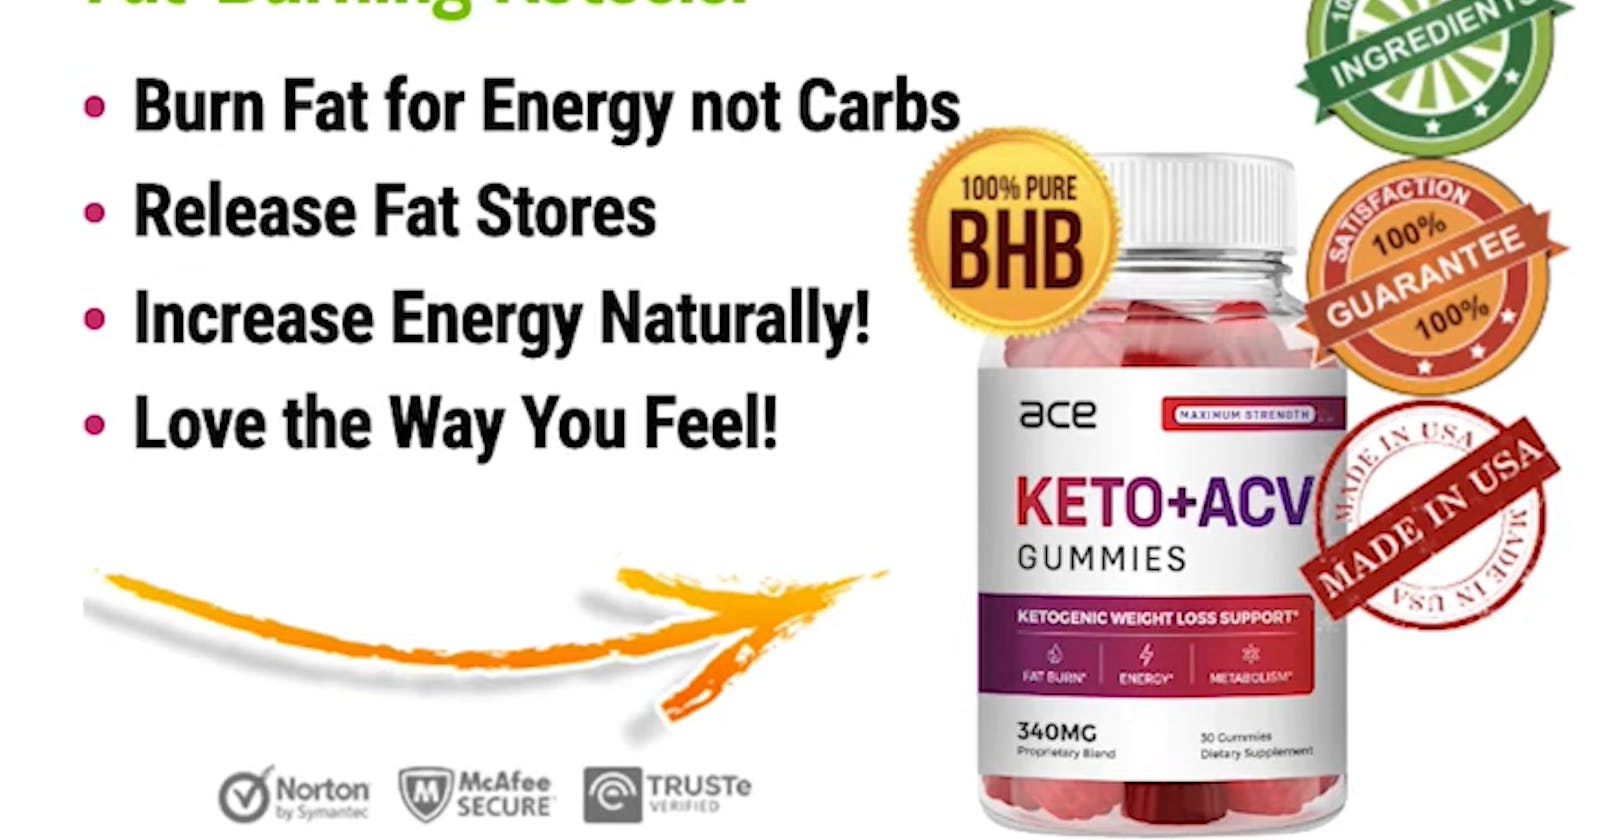 Ace Keto Gummies Reviews For Weight Loss?